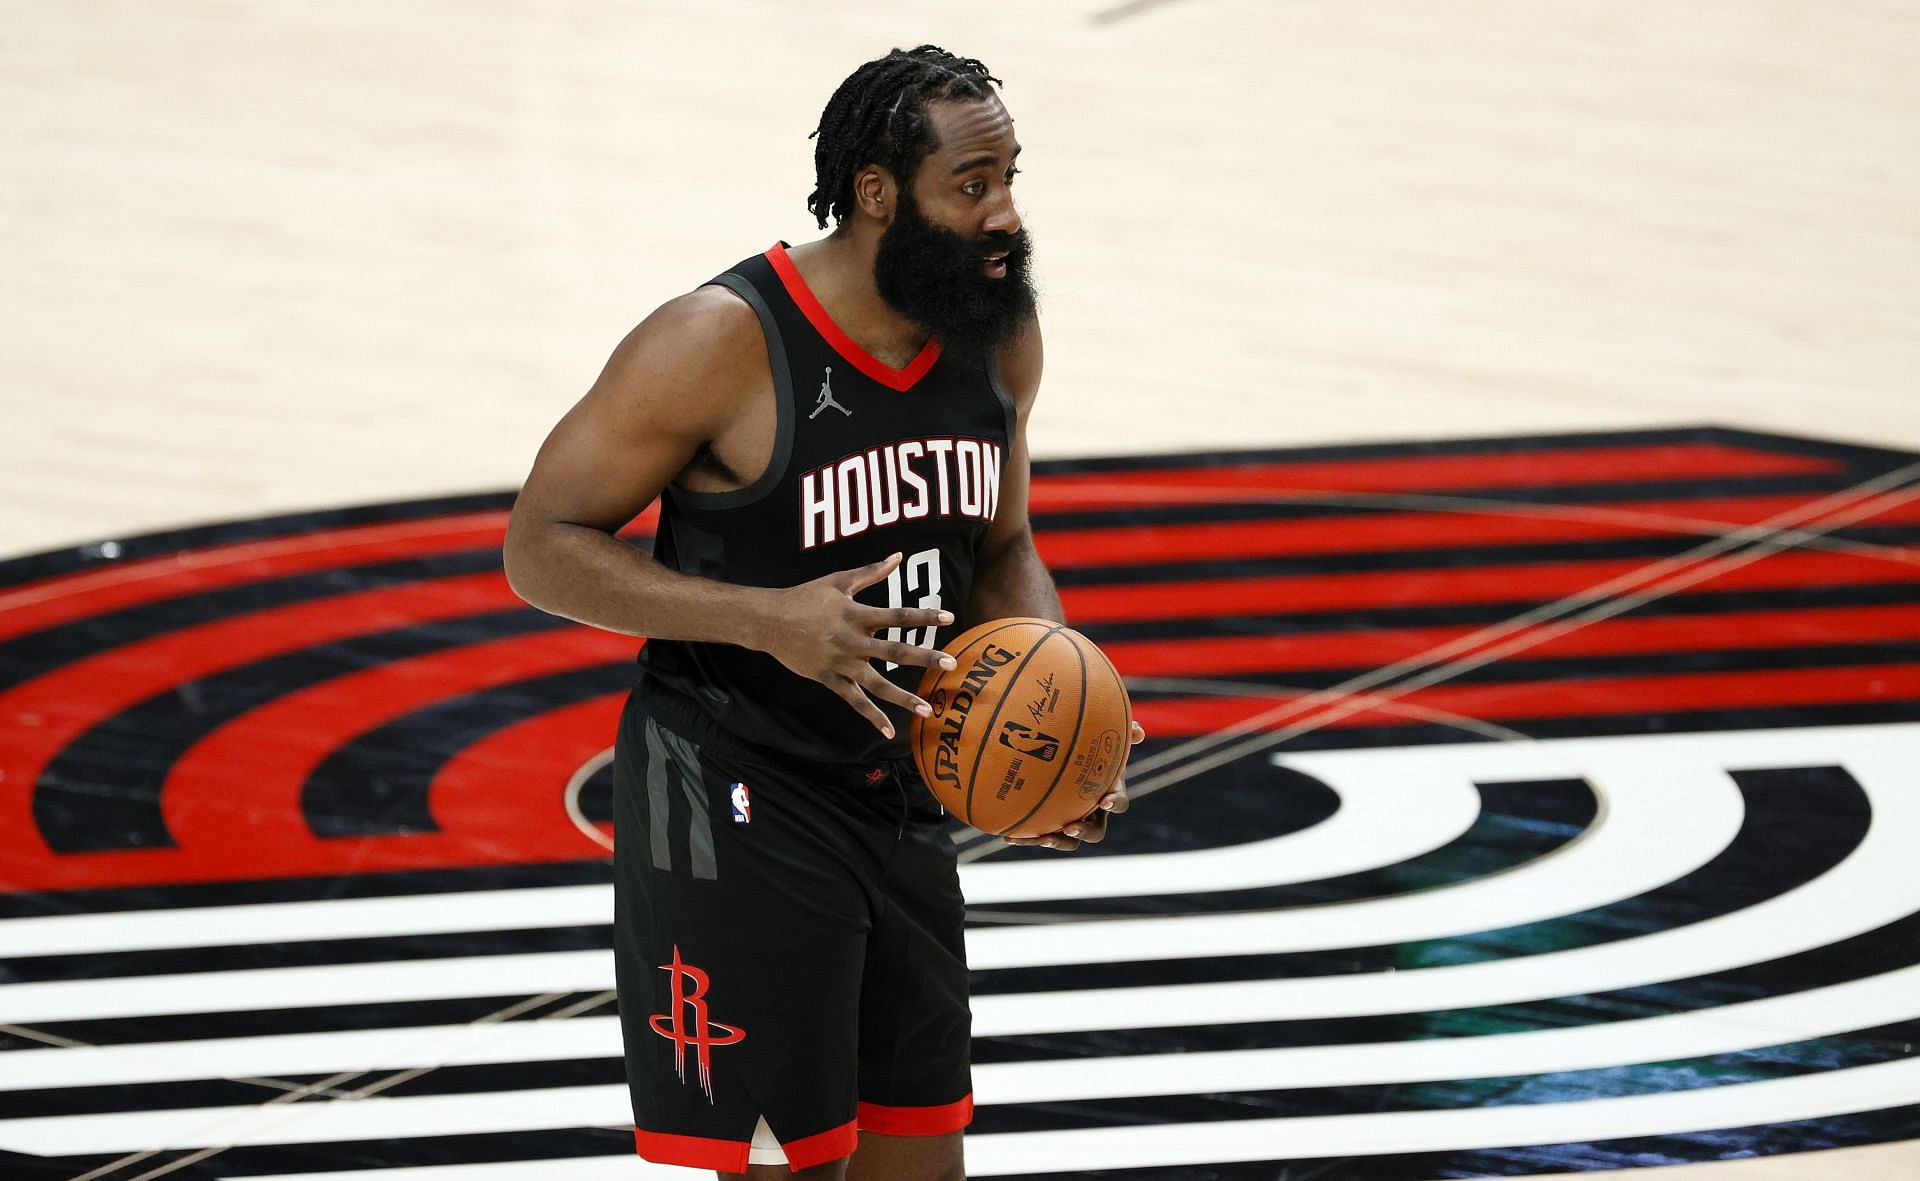 NBA playoffs 2022 - James Harden's performance reveals the uncertain future  for the Philadelphia 76ers' star duo - ESPN